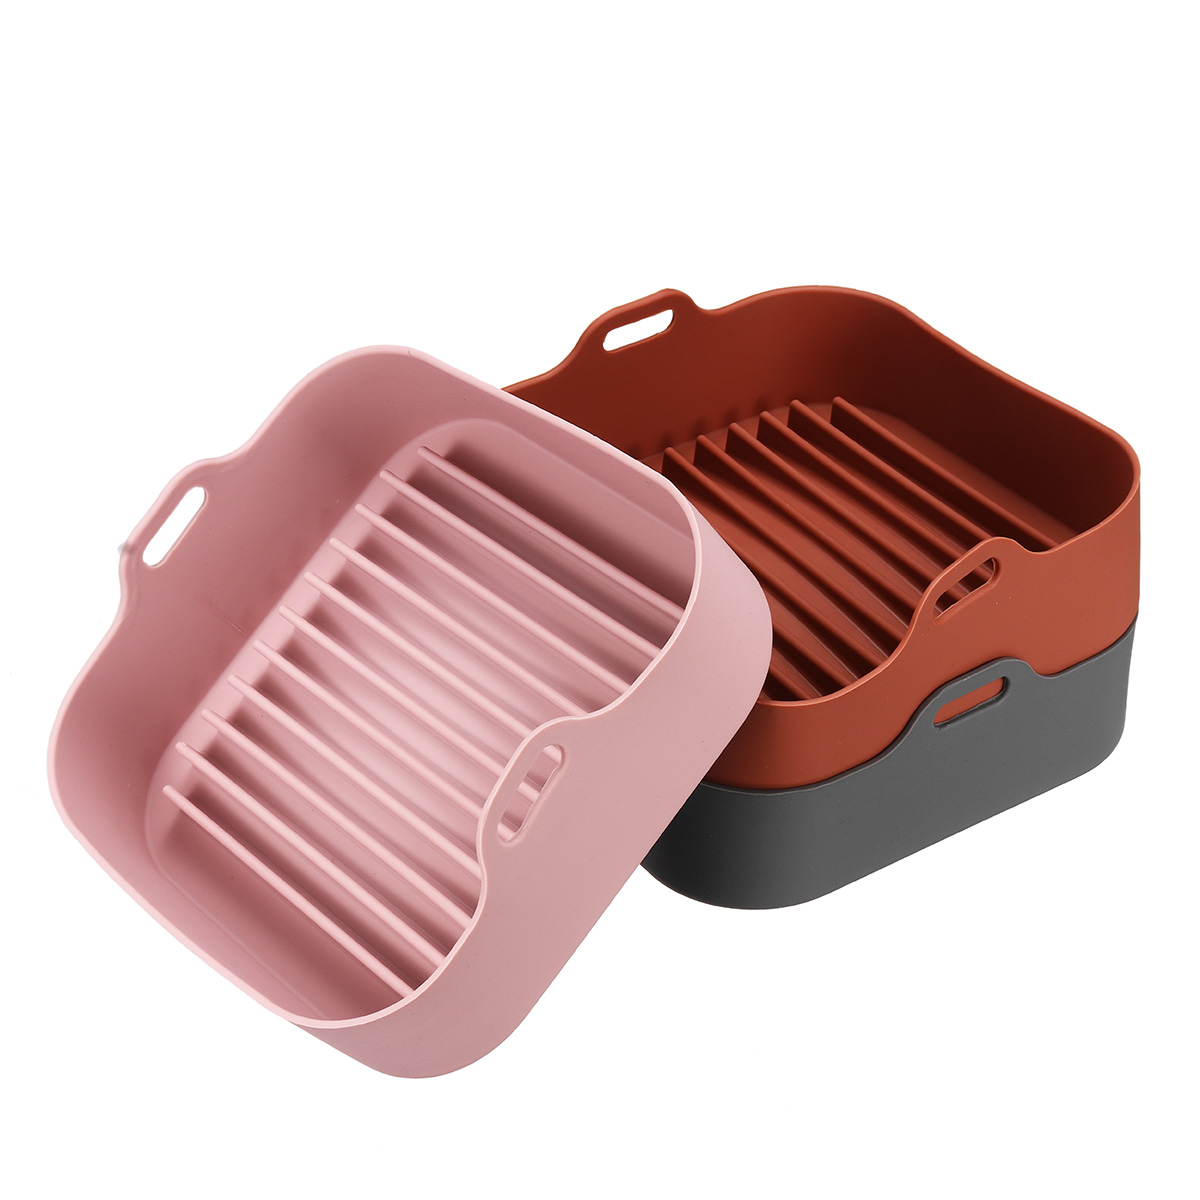 Multifunctional-Silicone-Baking-Tray-High-Temperature-Resistant-Non-stick-Bread-Fried-Baking-Pan-wit-1864776-14